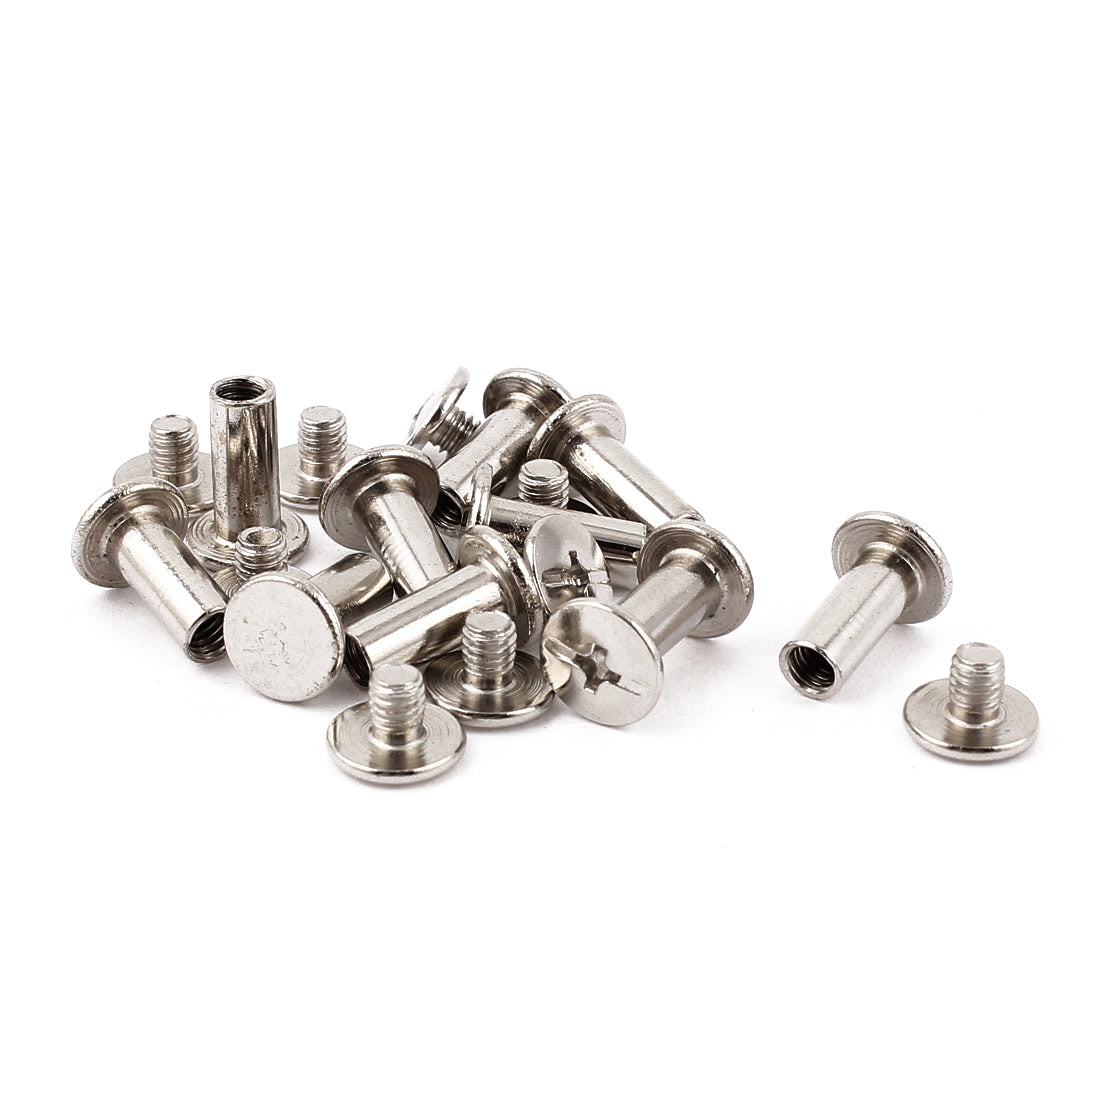 uxcell Uxcell 10pcs 5mmx12mm Nickel Plated Binding Chicago Screw Post for Album Scrapbook